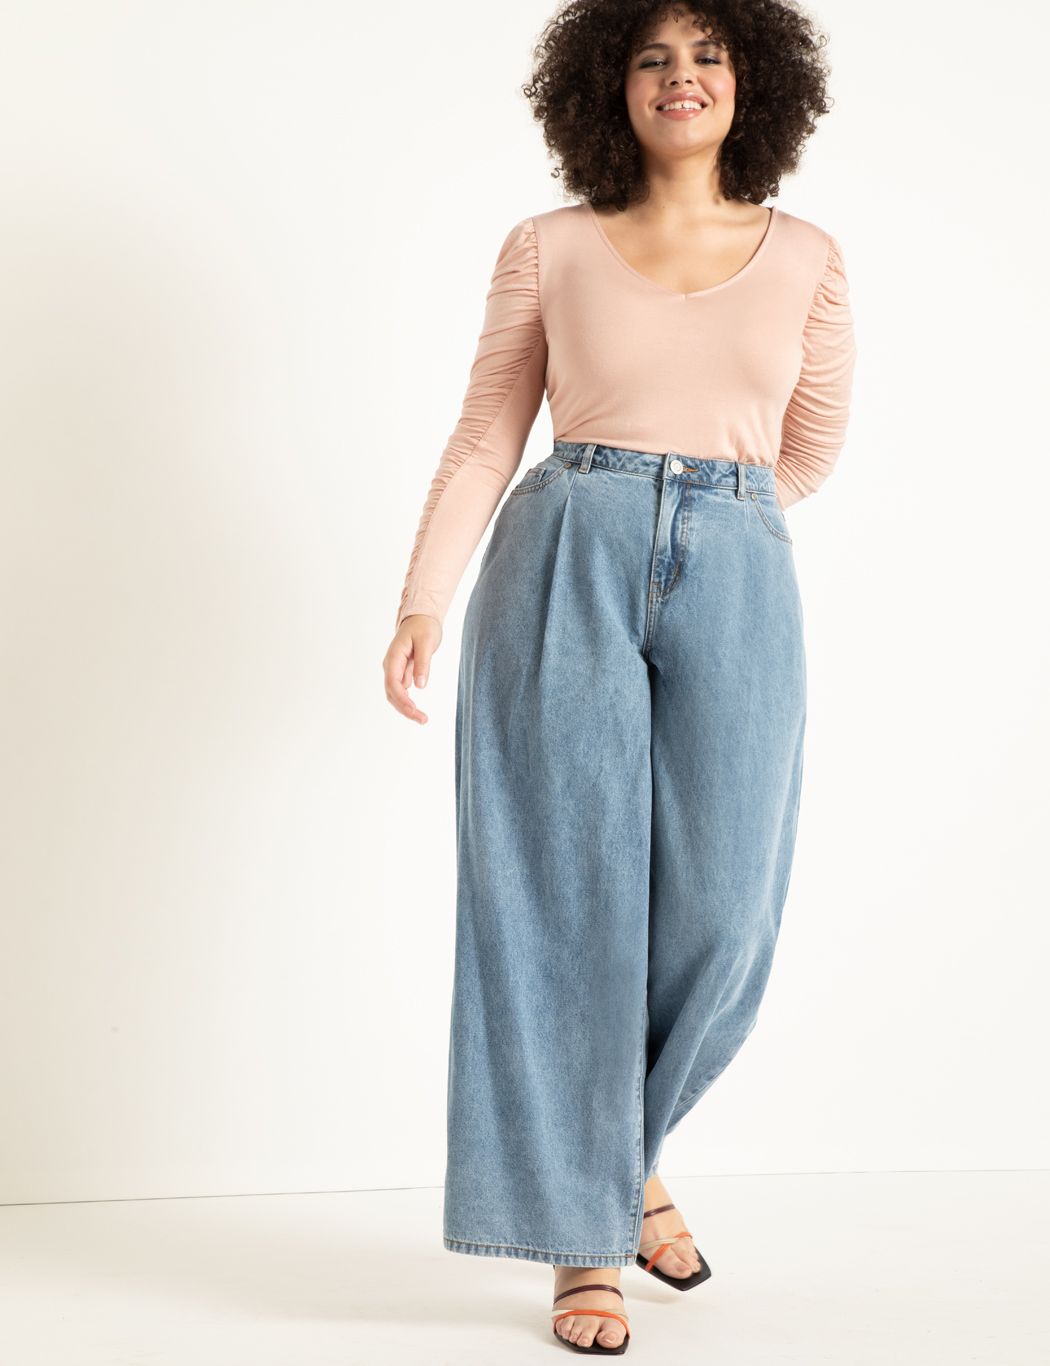 How to style plus-size wide-leg jeans?